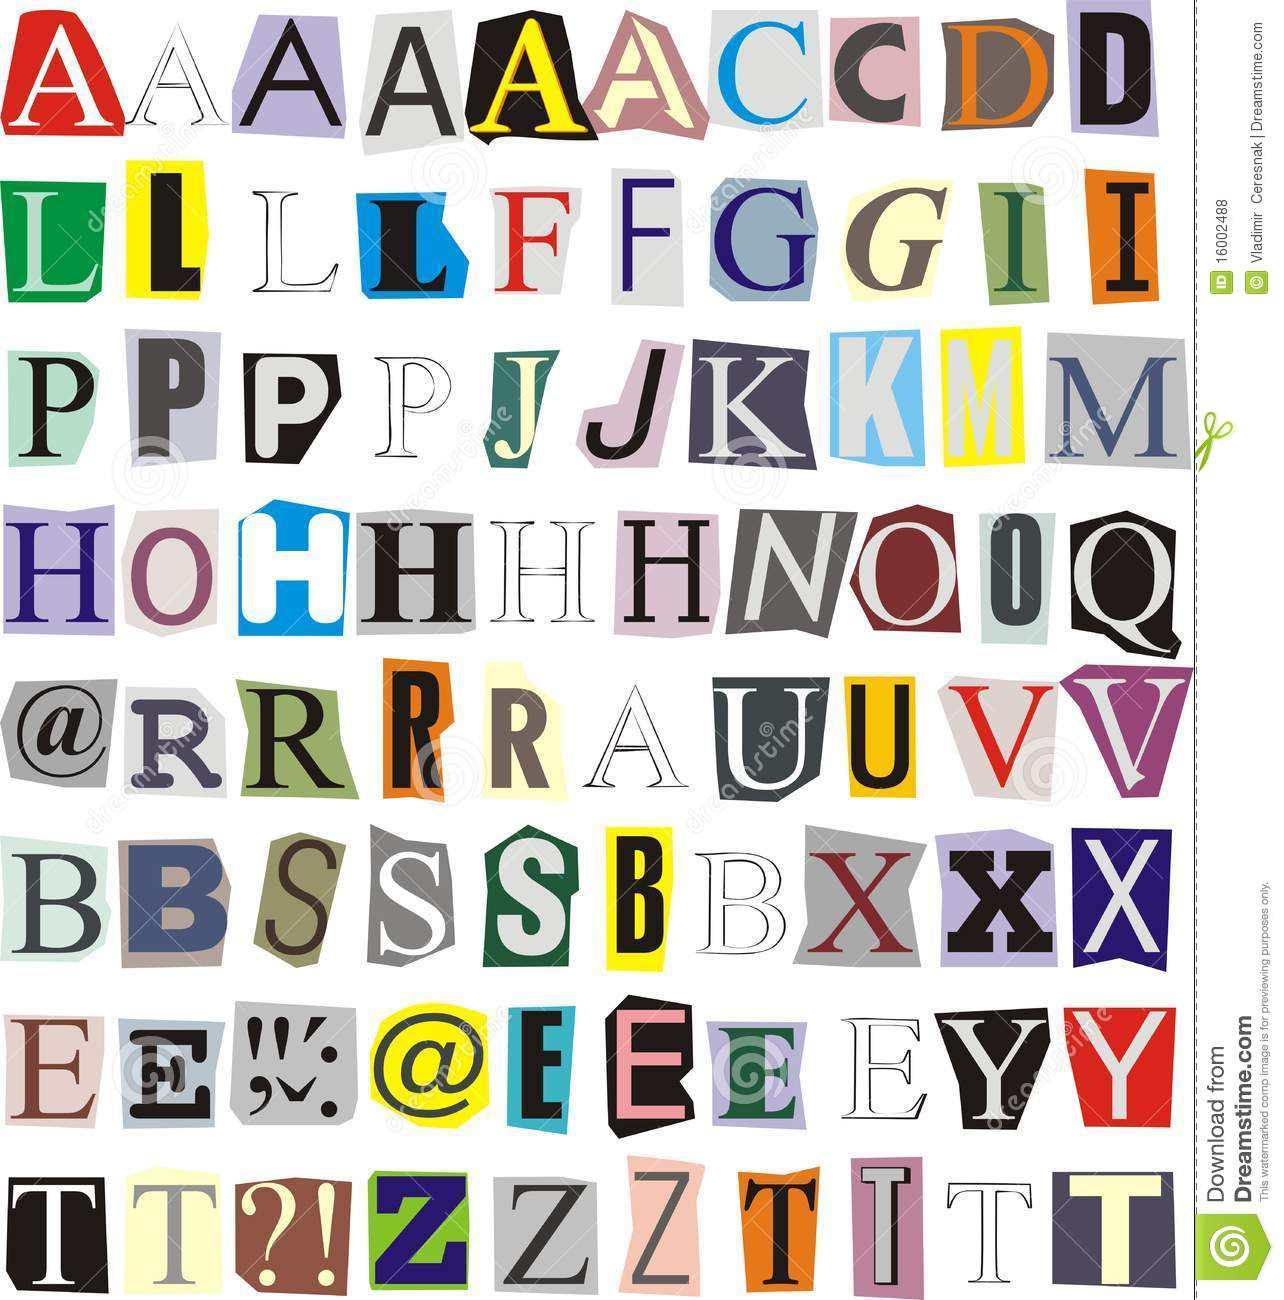 Printable Letters Cut Out 6 Best Images Of Printable Cut Out Letters Free Cut Out